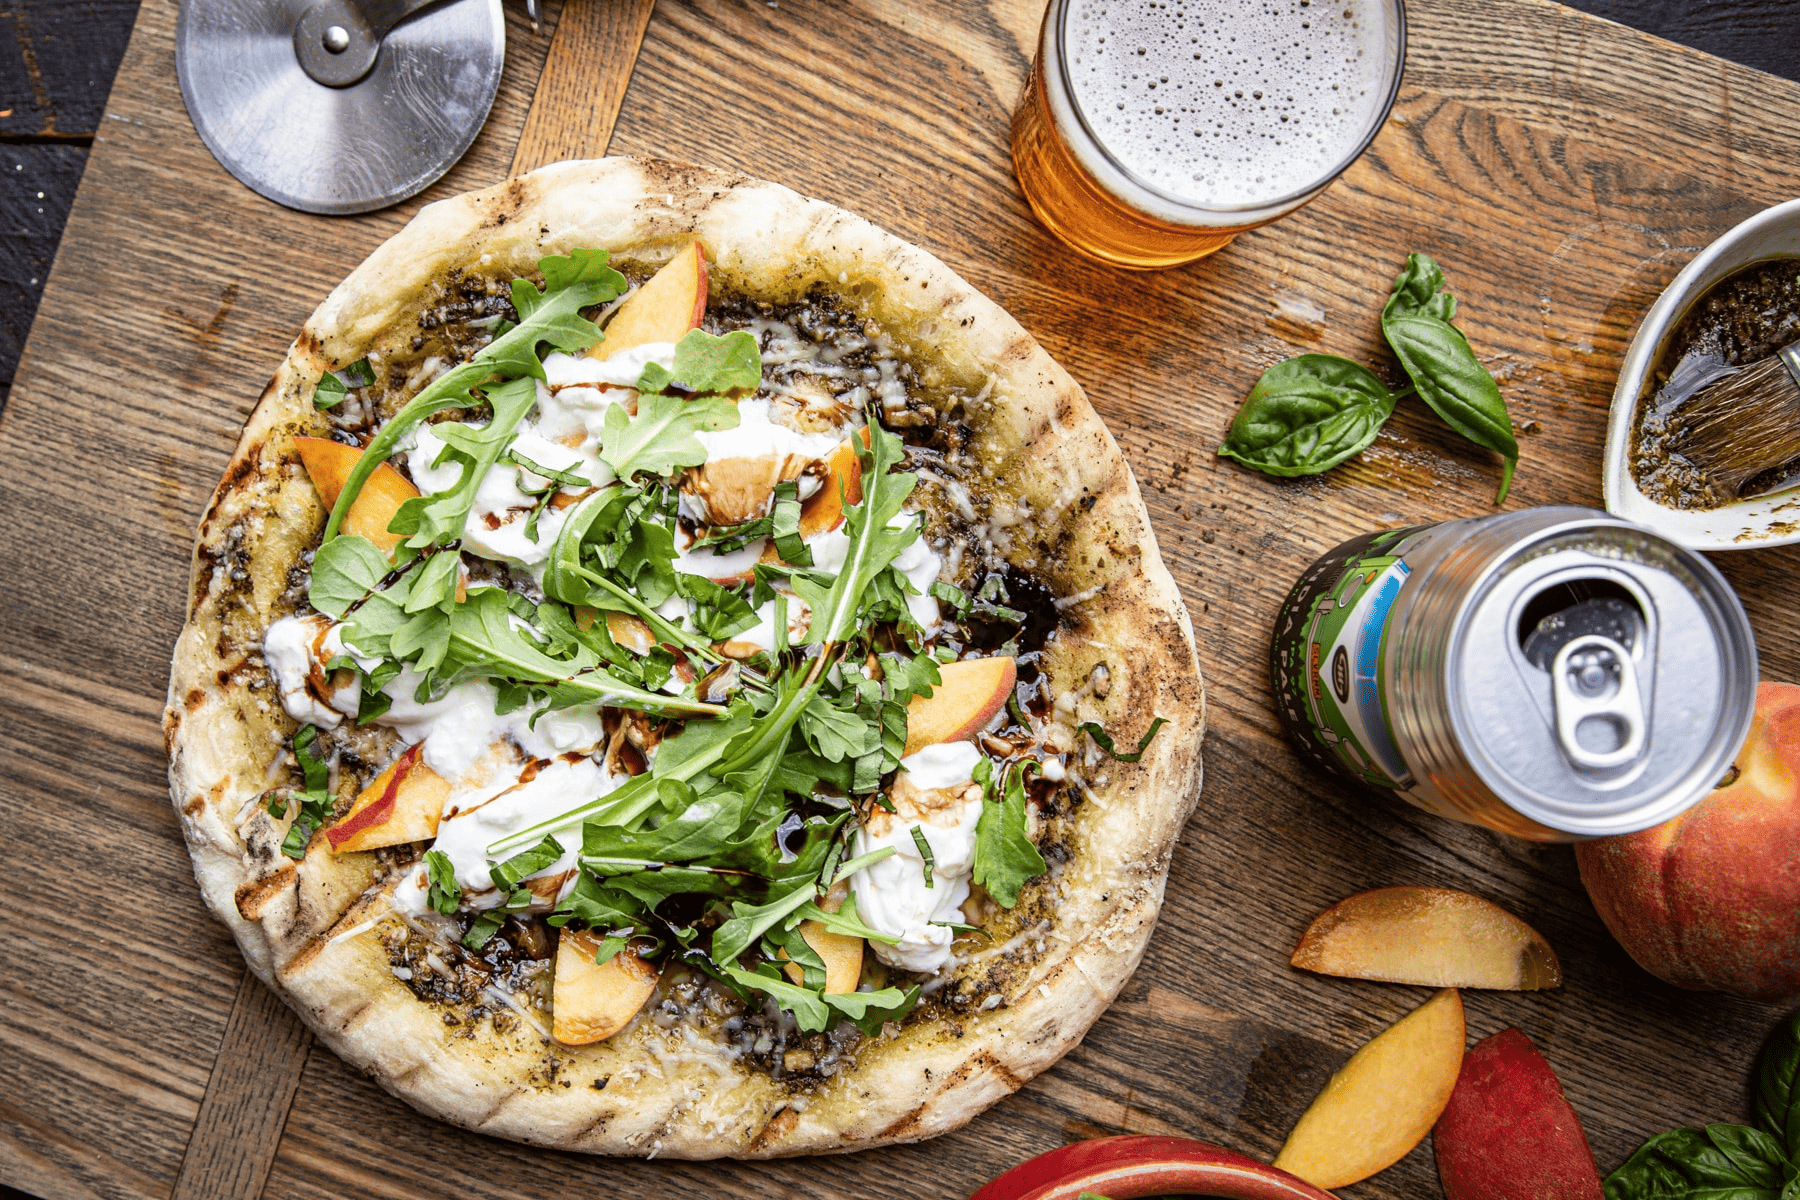 Grilled Beer Crust Pizza with Peaches, Burrata, and Pesto